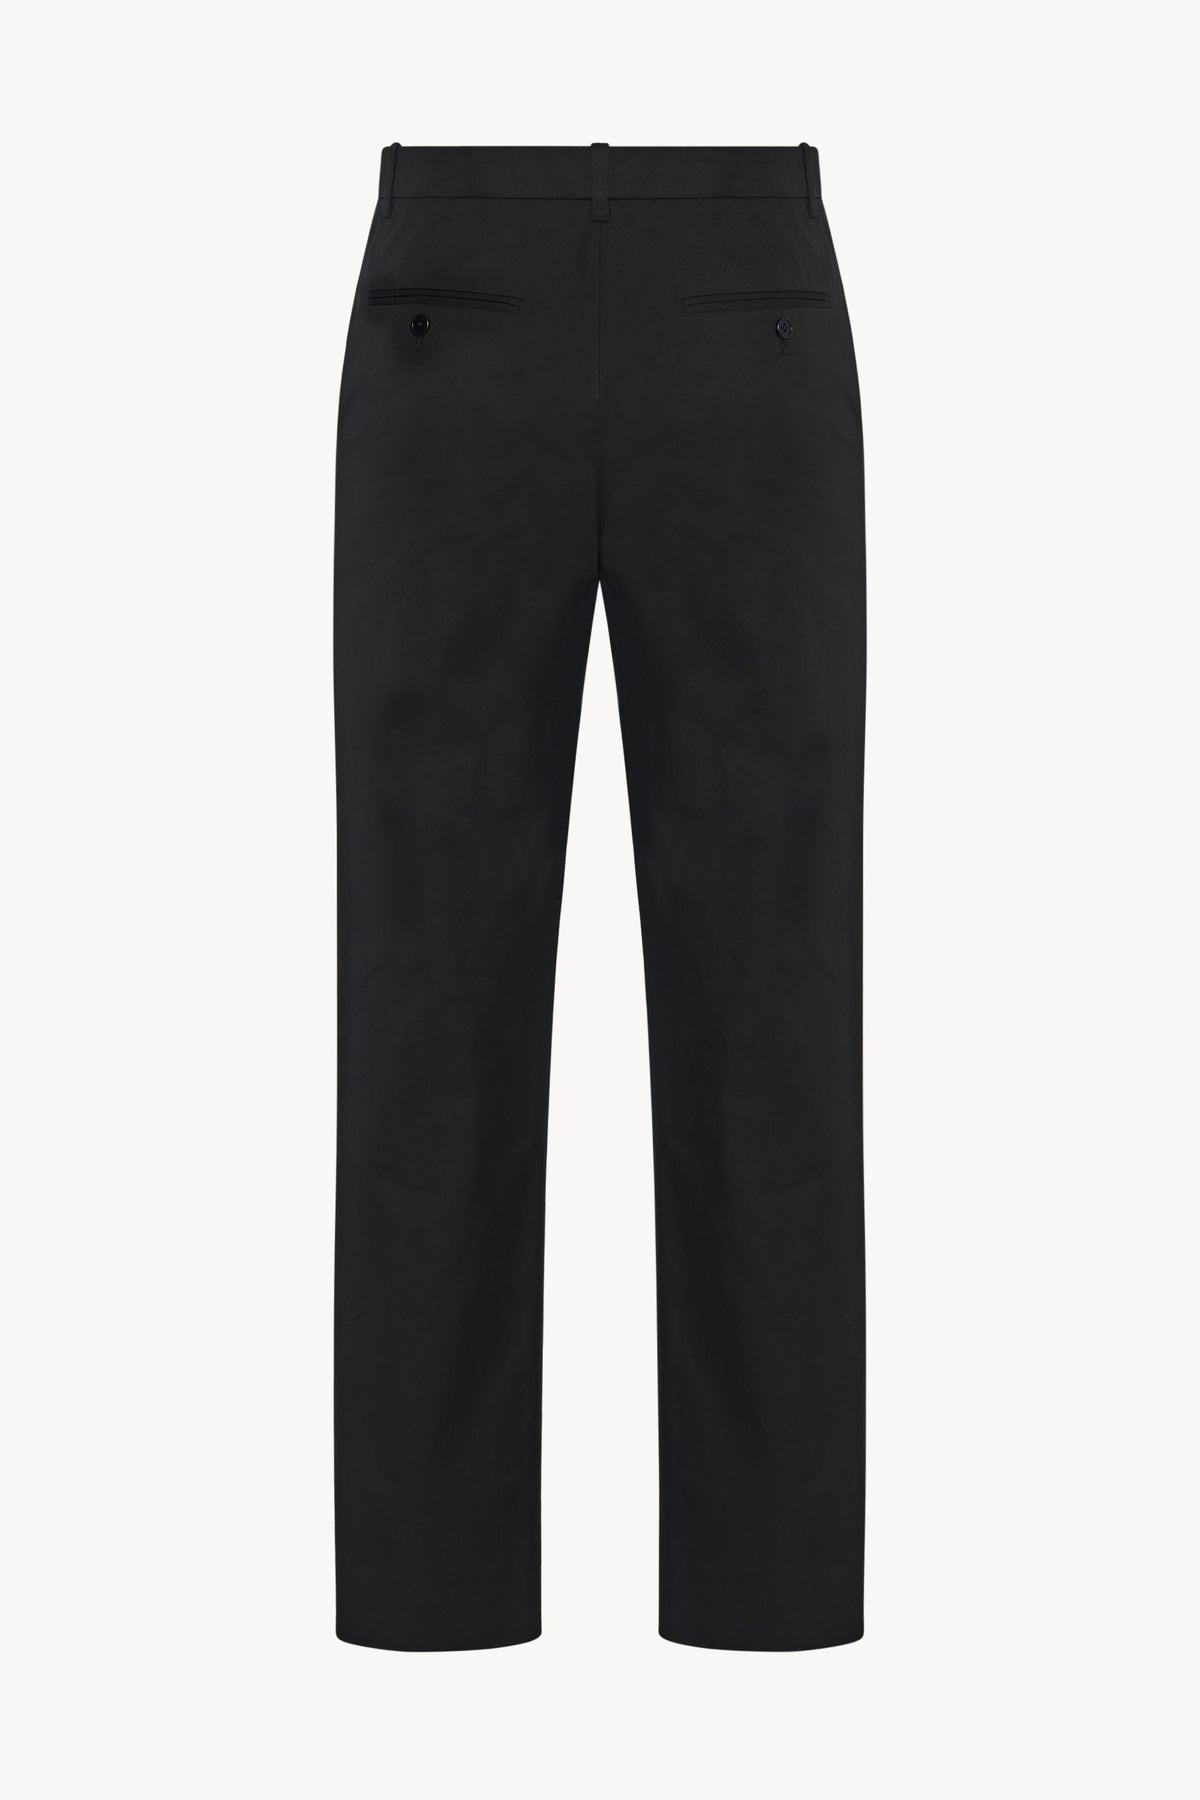 Wesson Pant in Cotton